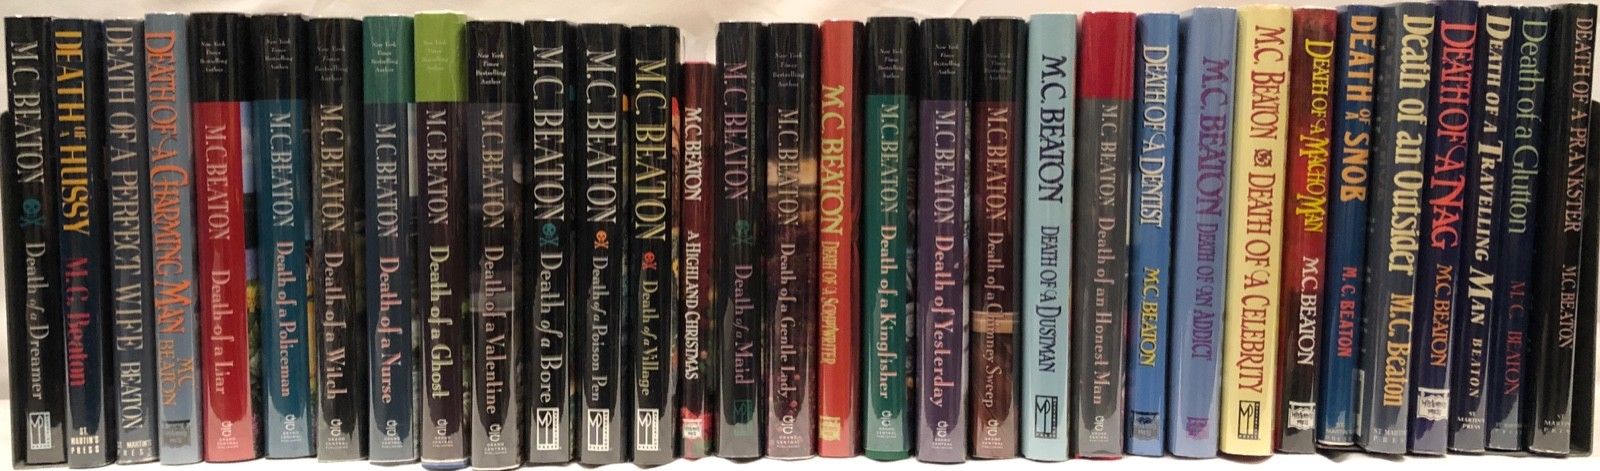 (Qty. 32) 1st Printing Mystery Books by M.C.Beaton w/Jackets in Very Good+ Cond.